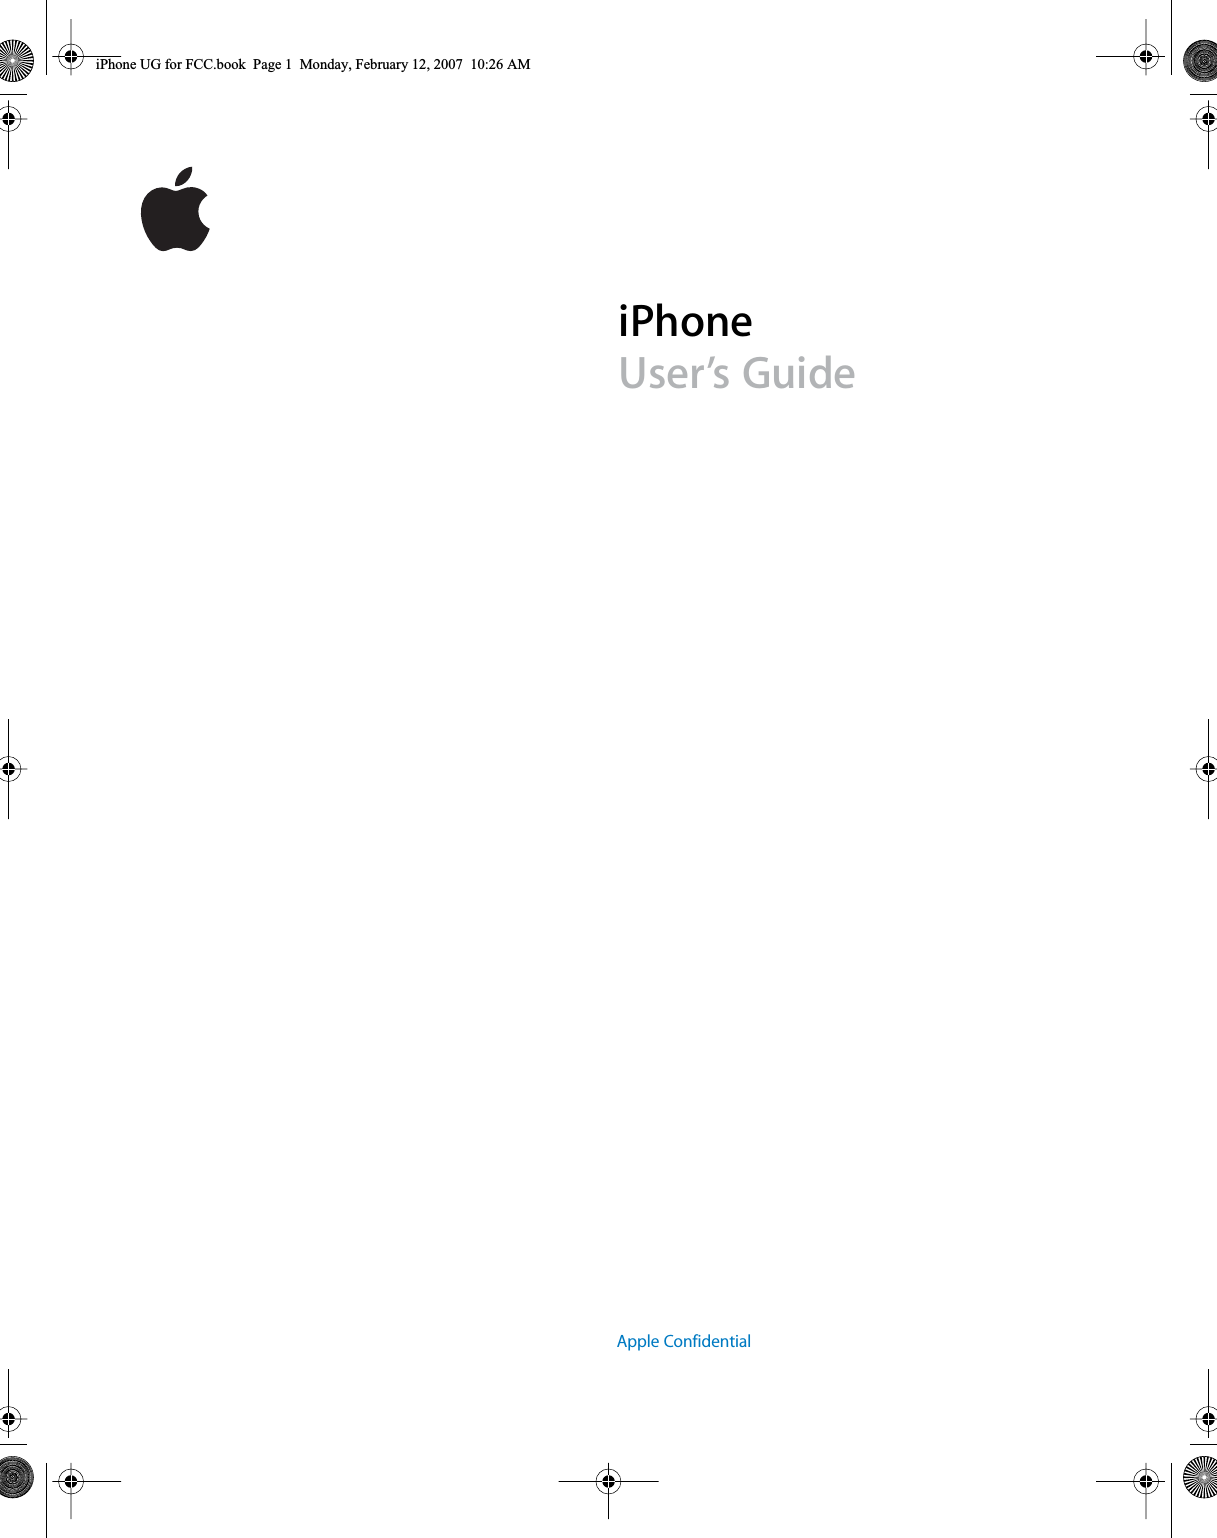  Apple Confidential iPhone User’s Guide iPhone UG for FCC.book  Page 1  Monday, February 12, 2007  10:26 AM